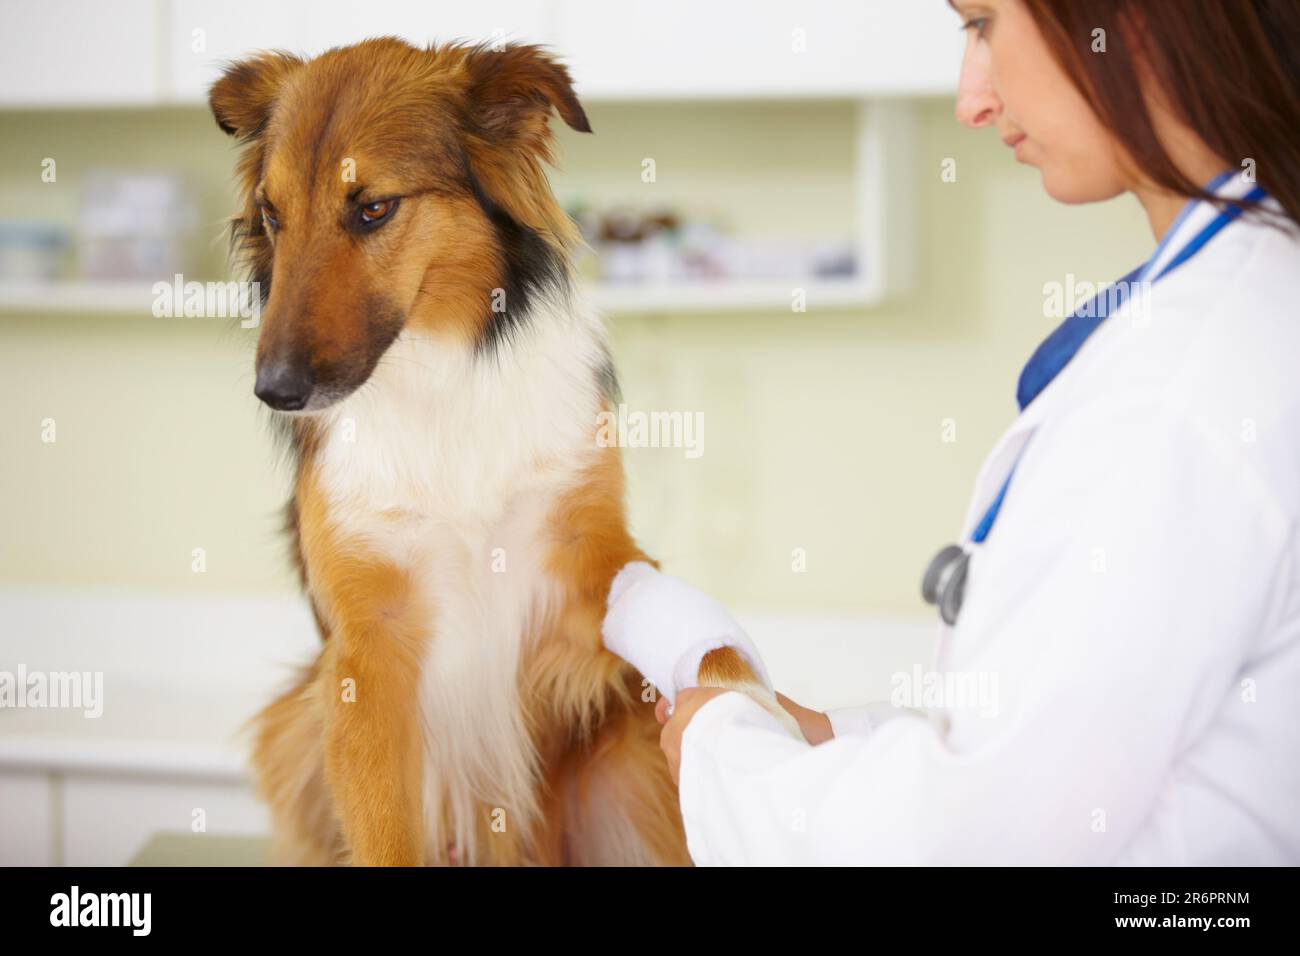 Doctor, bandage or dog at veterinary clinic in an emergency healthcare inspection or accident. Veterinarian, helping or injured rough collie pet in Stock Photo